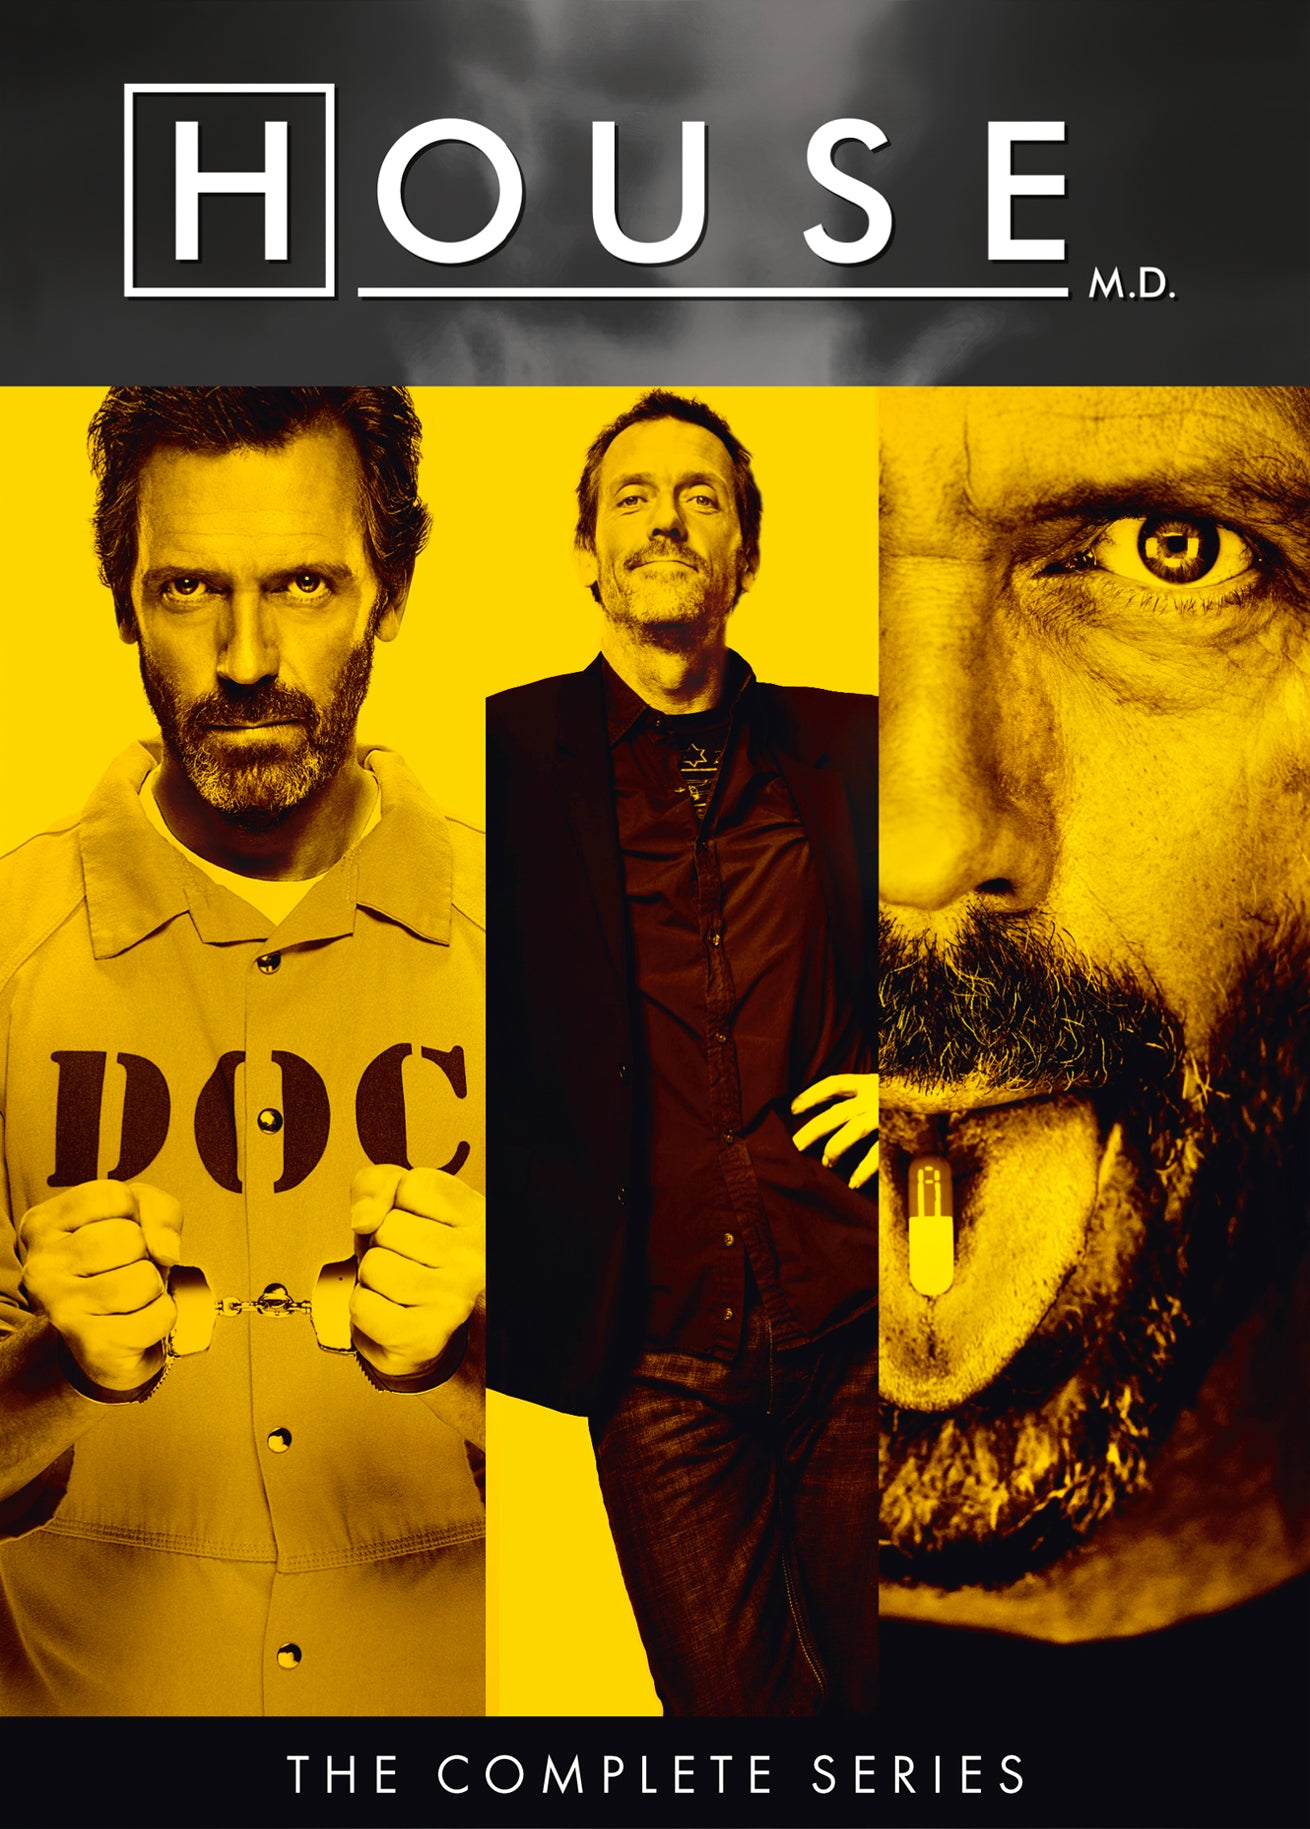 House: The Complete Series cover art